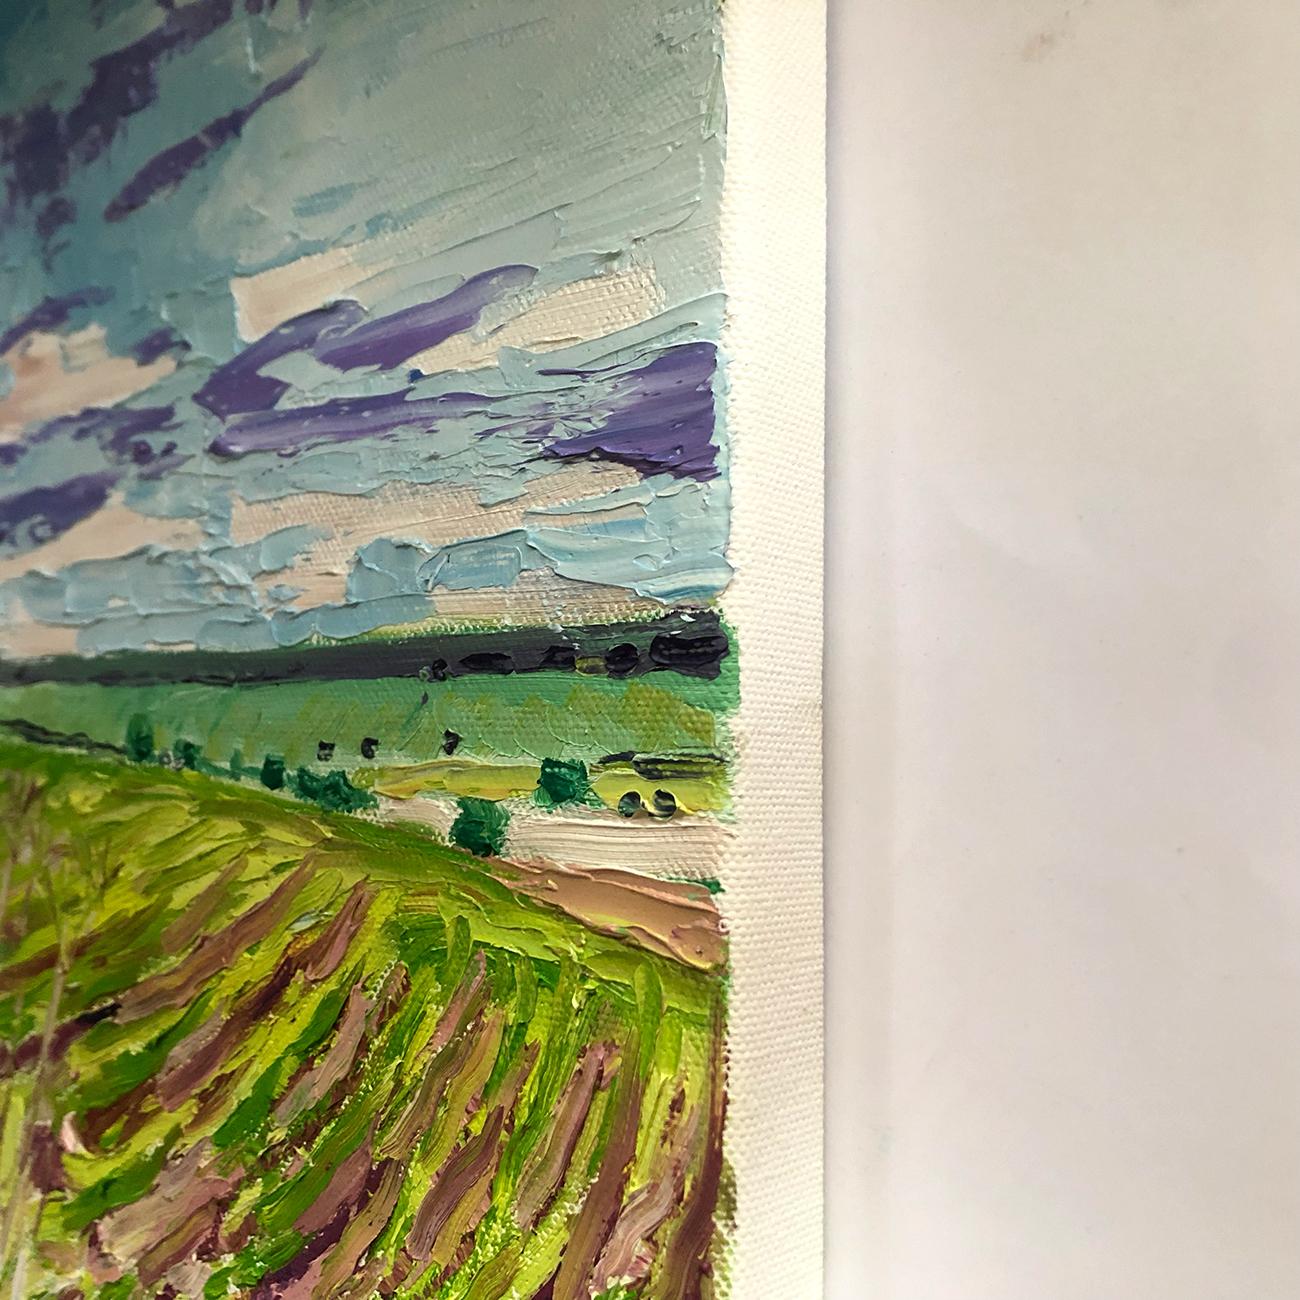 Deddington fields [March 2022]
original

Oil Paint on Canvas

Image size: H:30 cm x W:30 cm

Complete Size of Unframed Work: H:30 cm x W:30 cm x D:2cm

Sold Unframed

Please note that insitu images are purely an indication of how a piece may